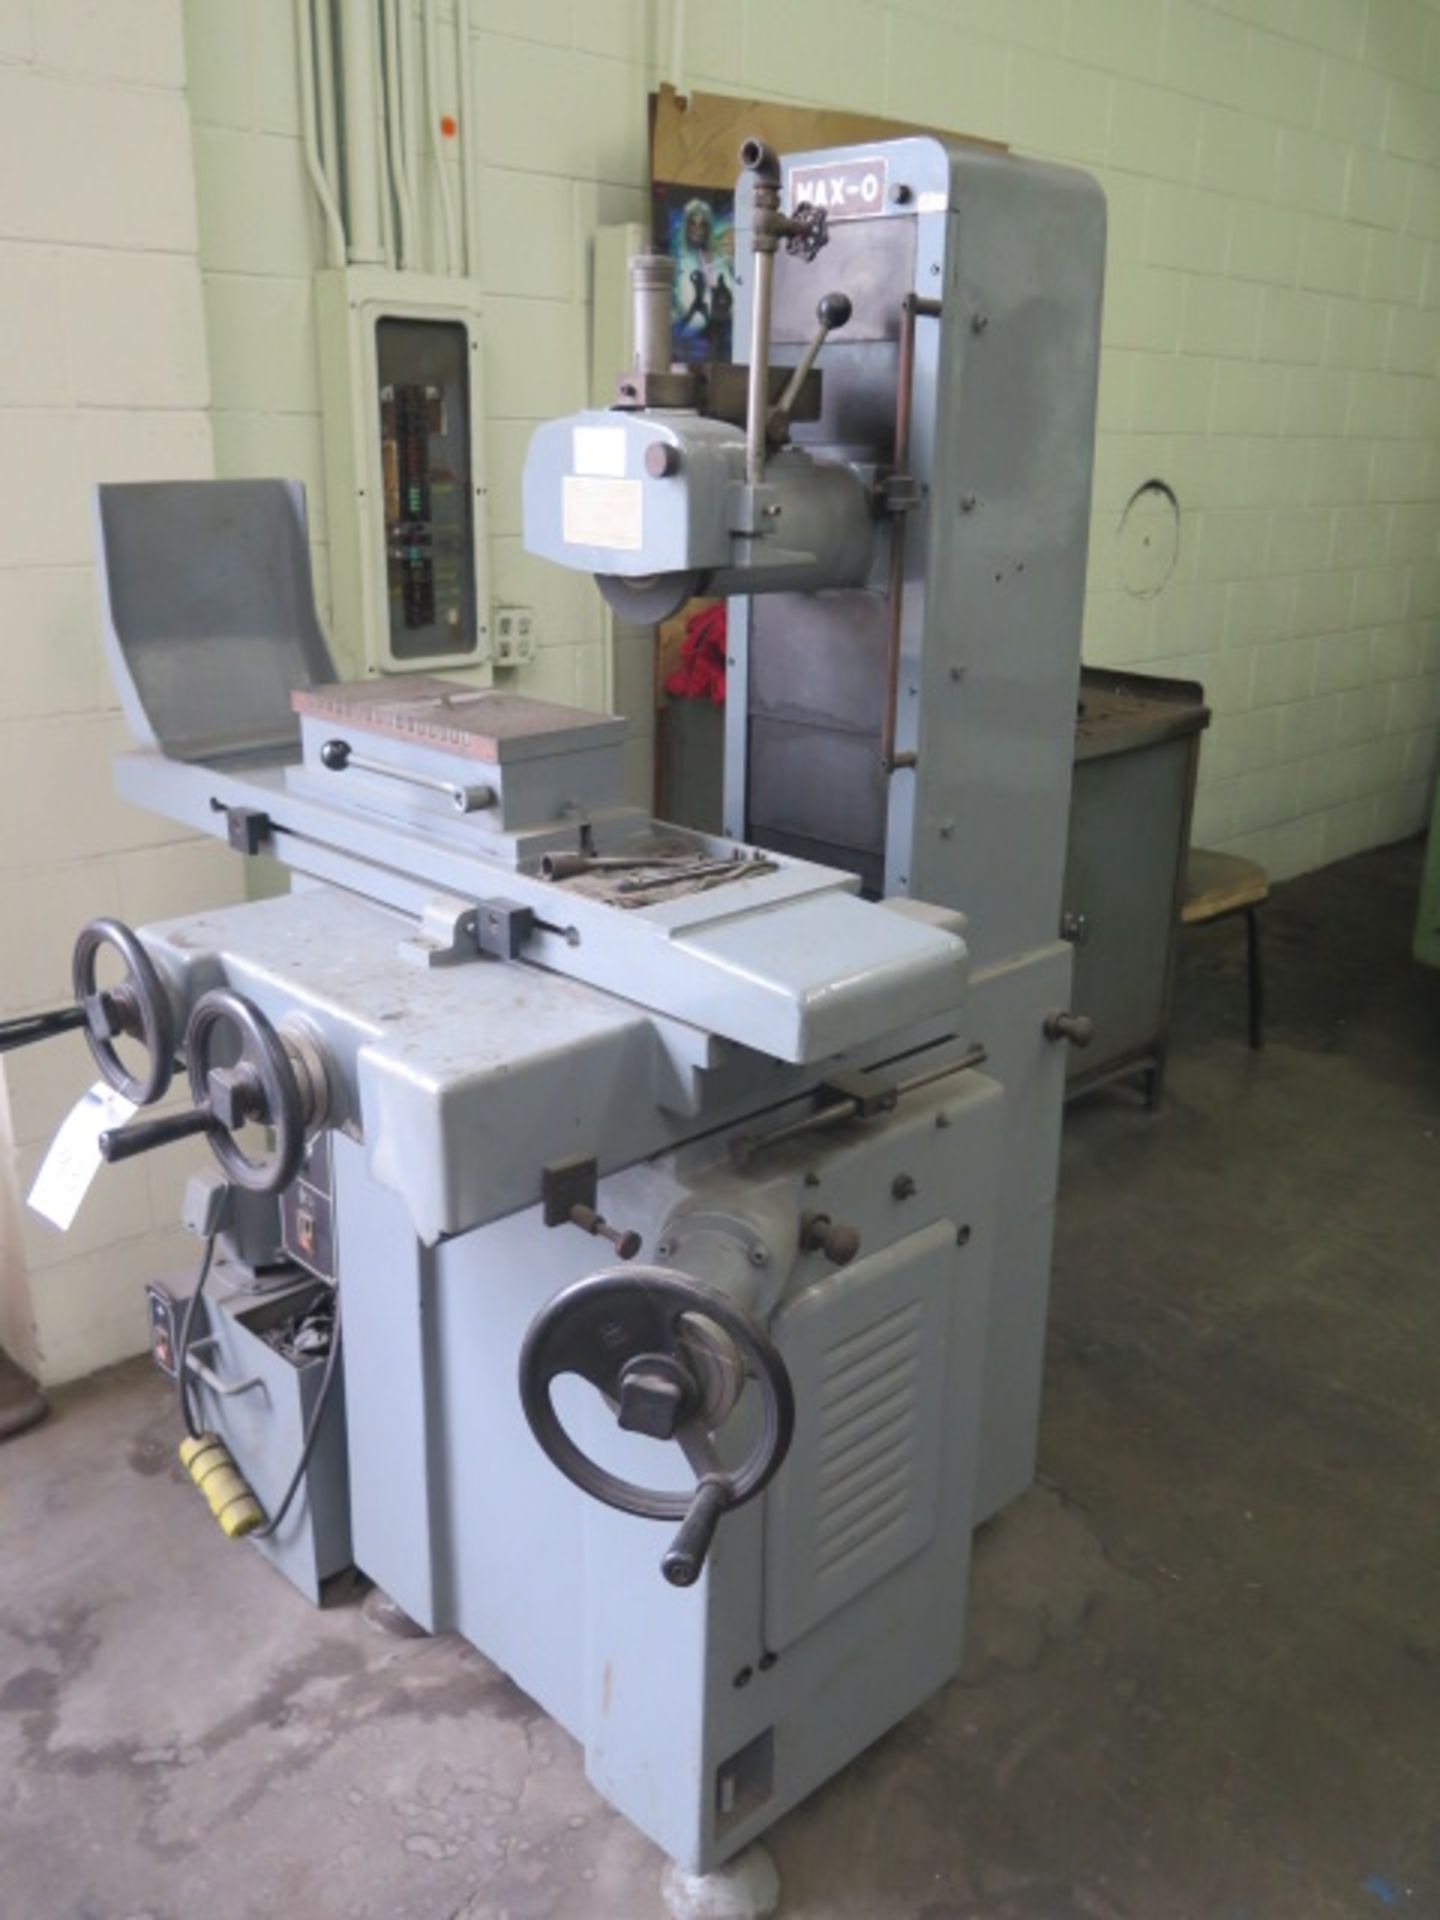 Max-O mdl. KGS-200 6” x 14” Surface Grinder s/n 780923-3 w/ Magnetic Chuck, Wheel Dresser, Coolant - Image 2 of 8